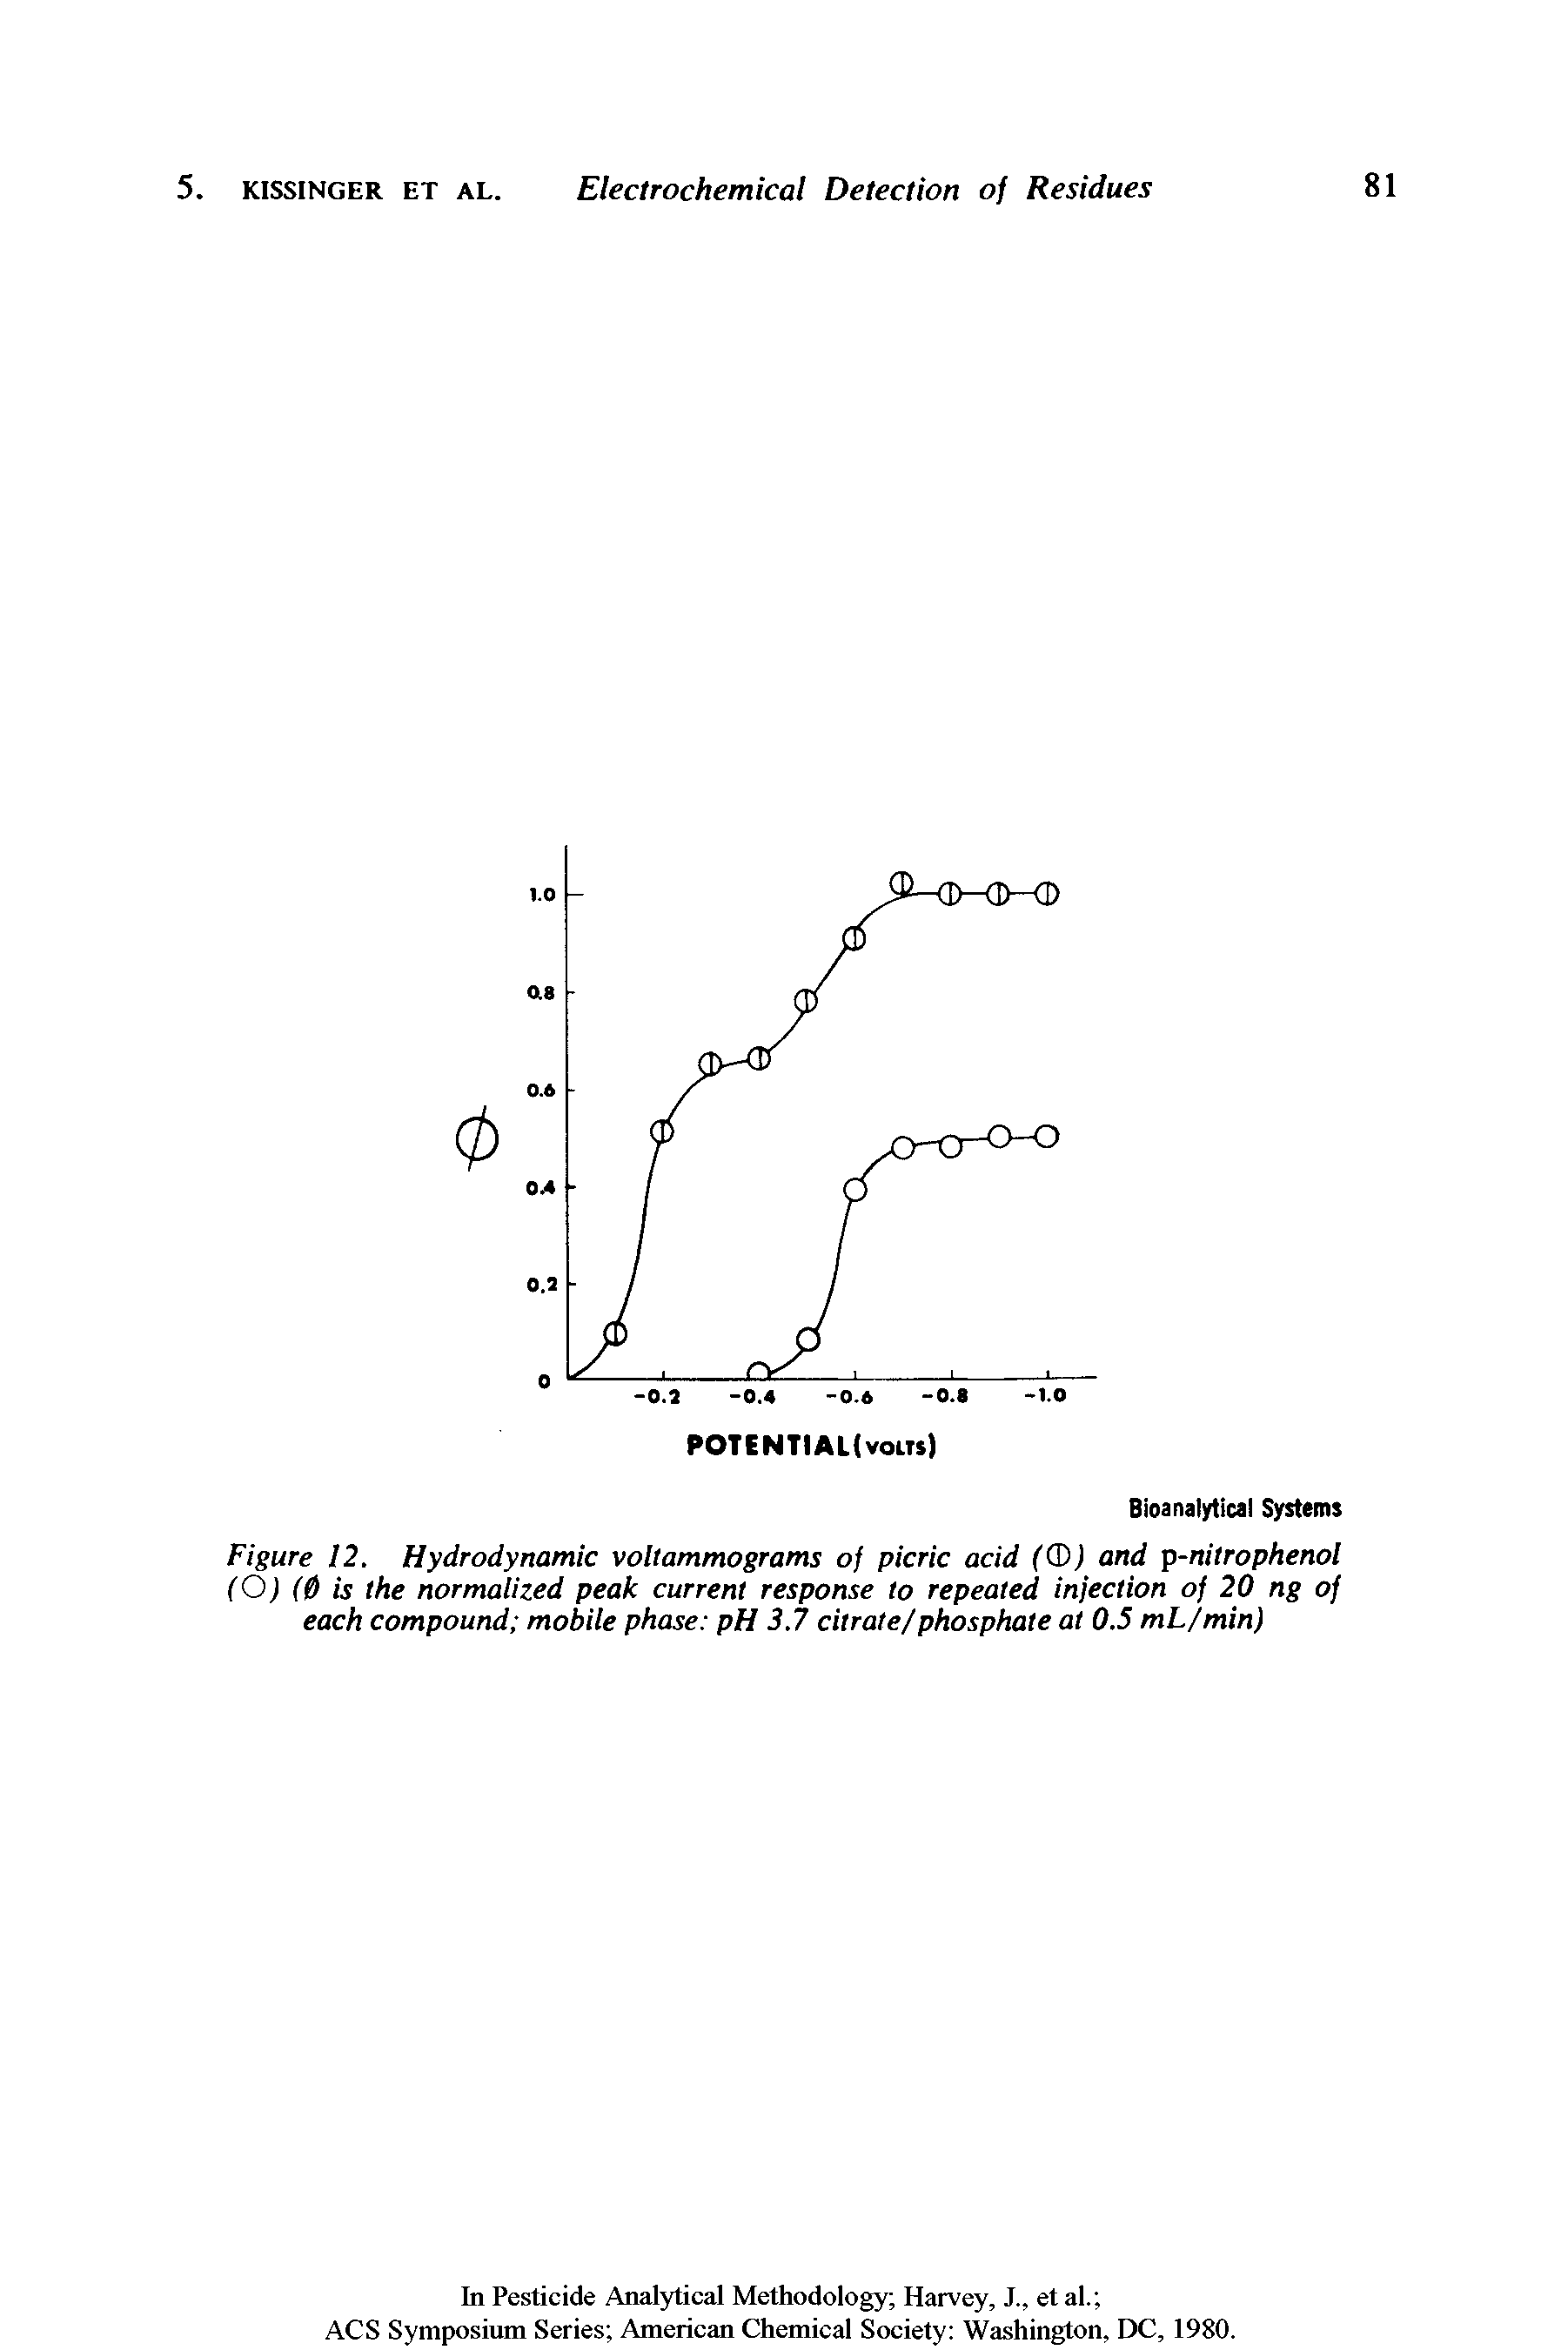 Figure 12. Hydrodynamic voltammograms of picric acid (Q)) and p-nitrophenol (O) (0 is the normalized peak current response to repeated injection of 20 ng of each compound mobile phase pH 3.7 citrate/phosphate at 0.5 mL/min)...